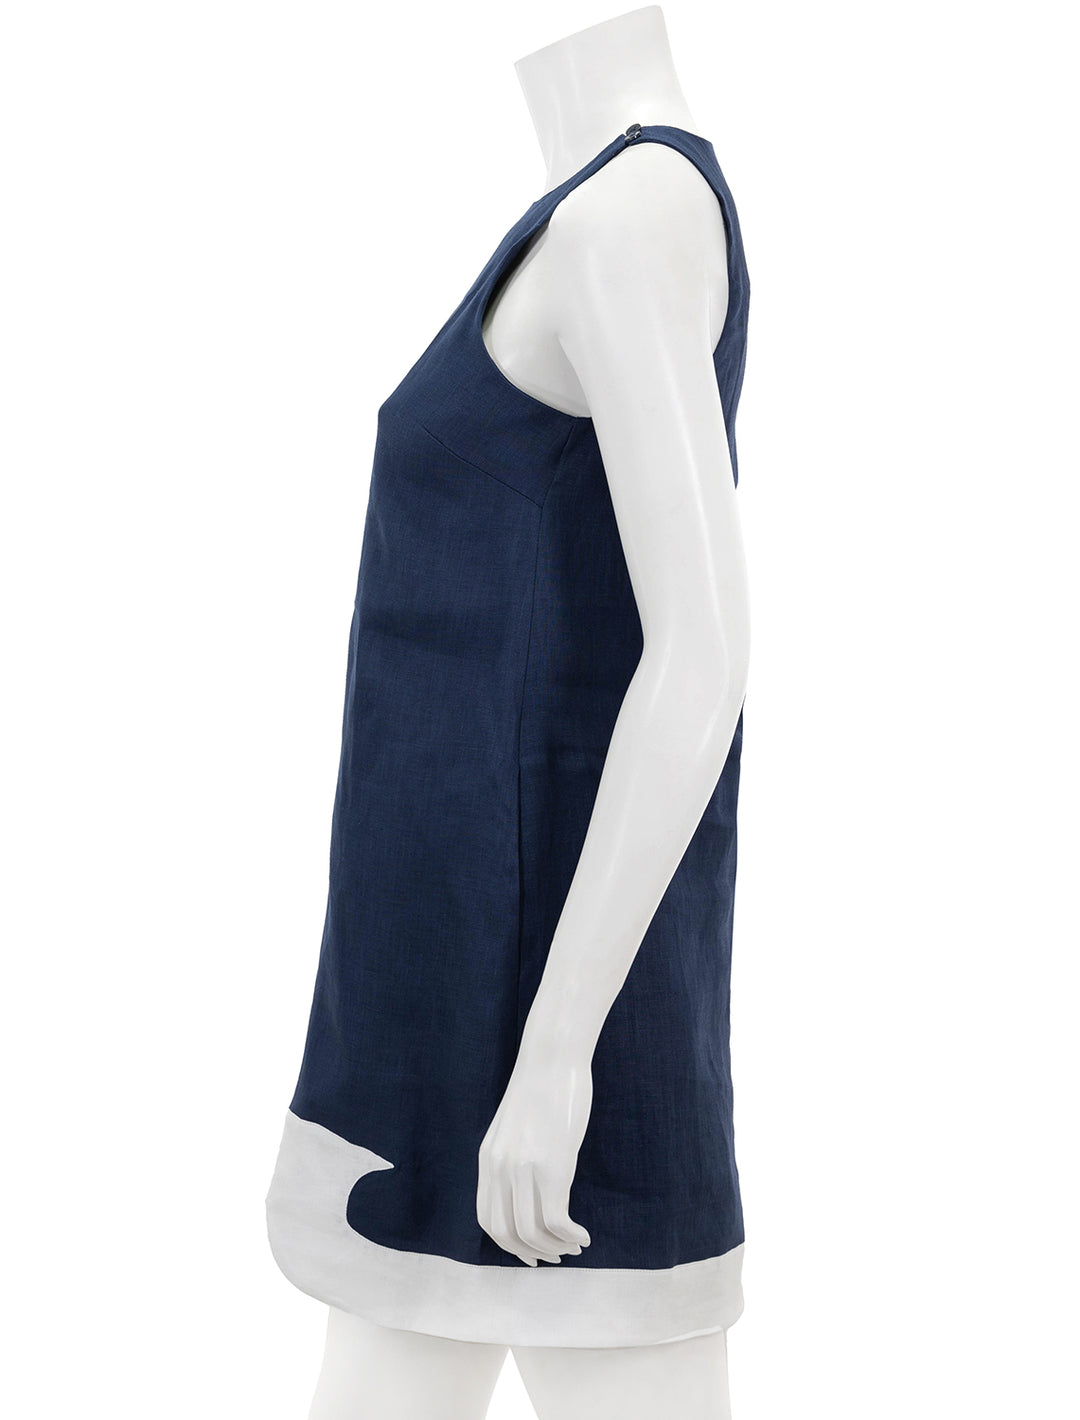 Side view of STAUD's allori dress in navy and white.